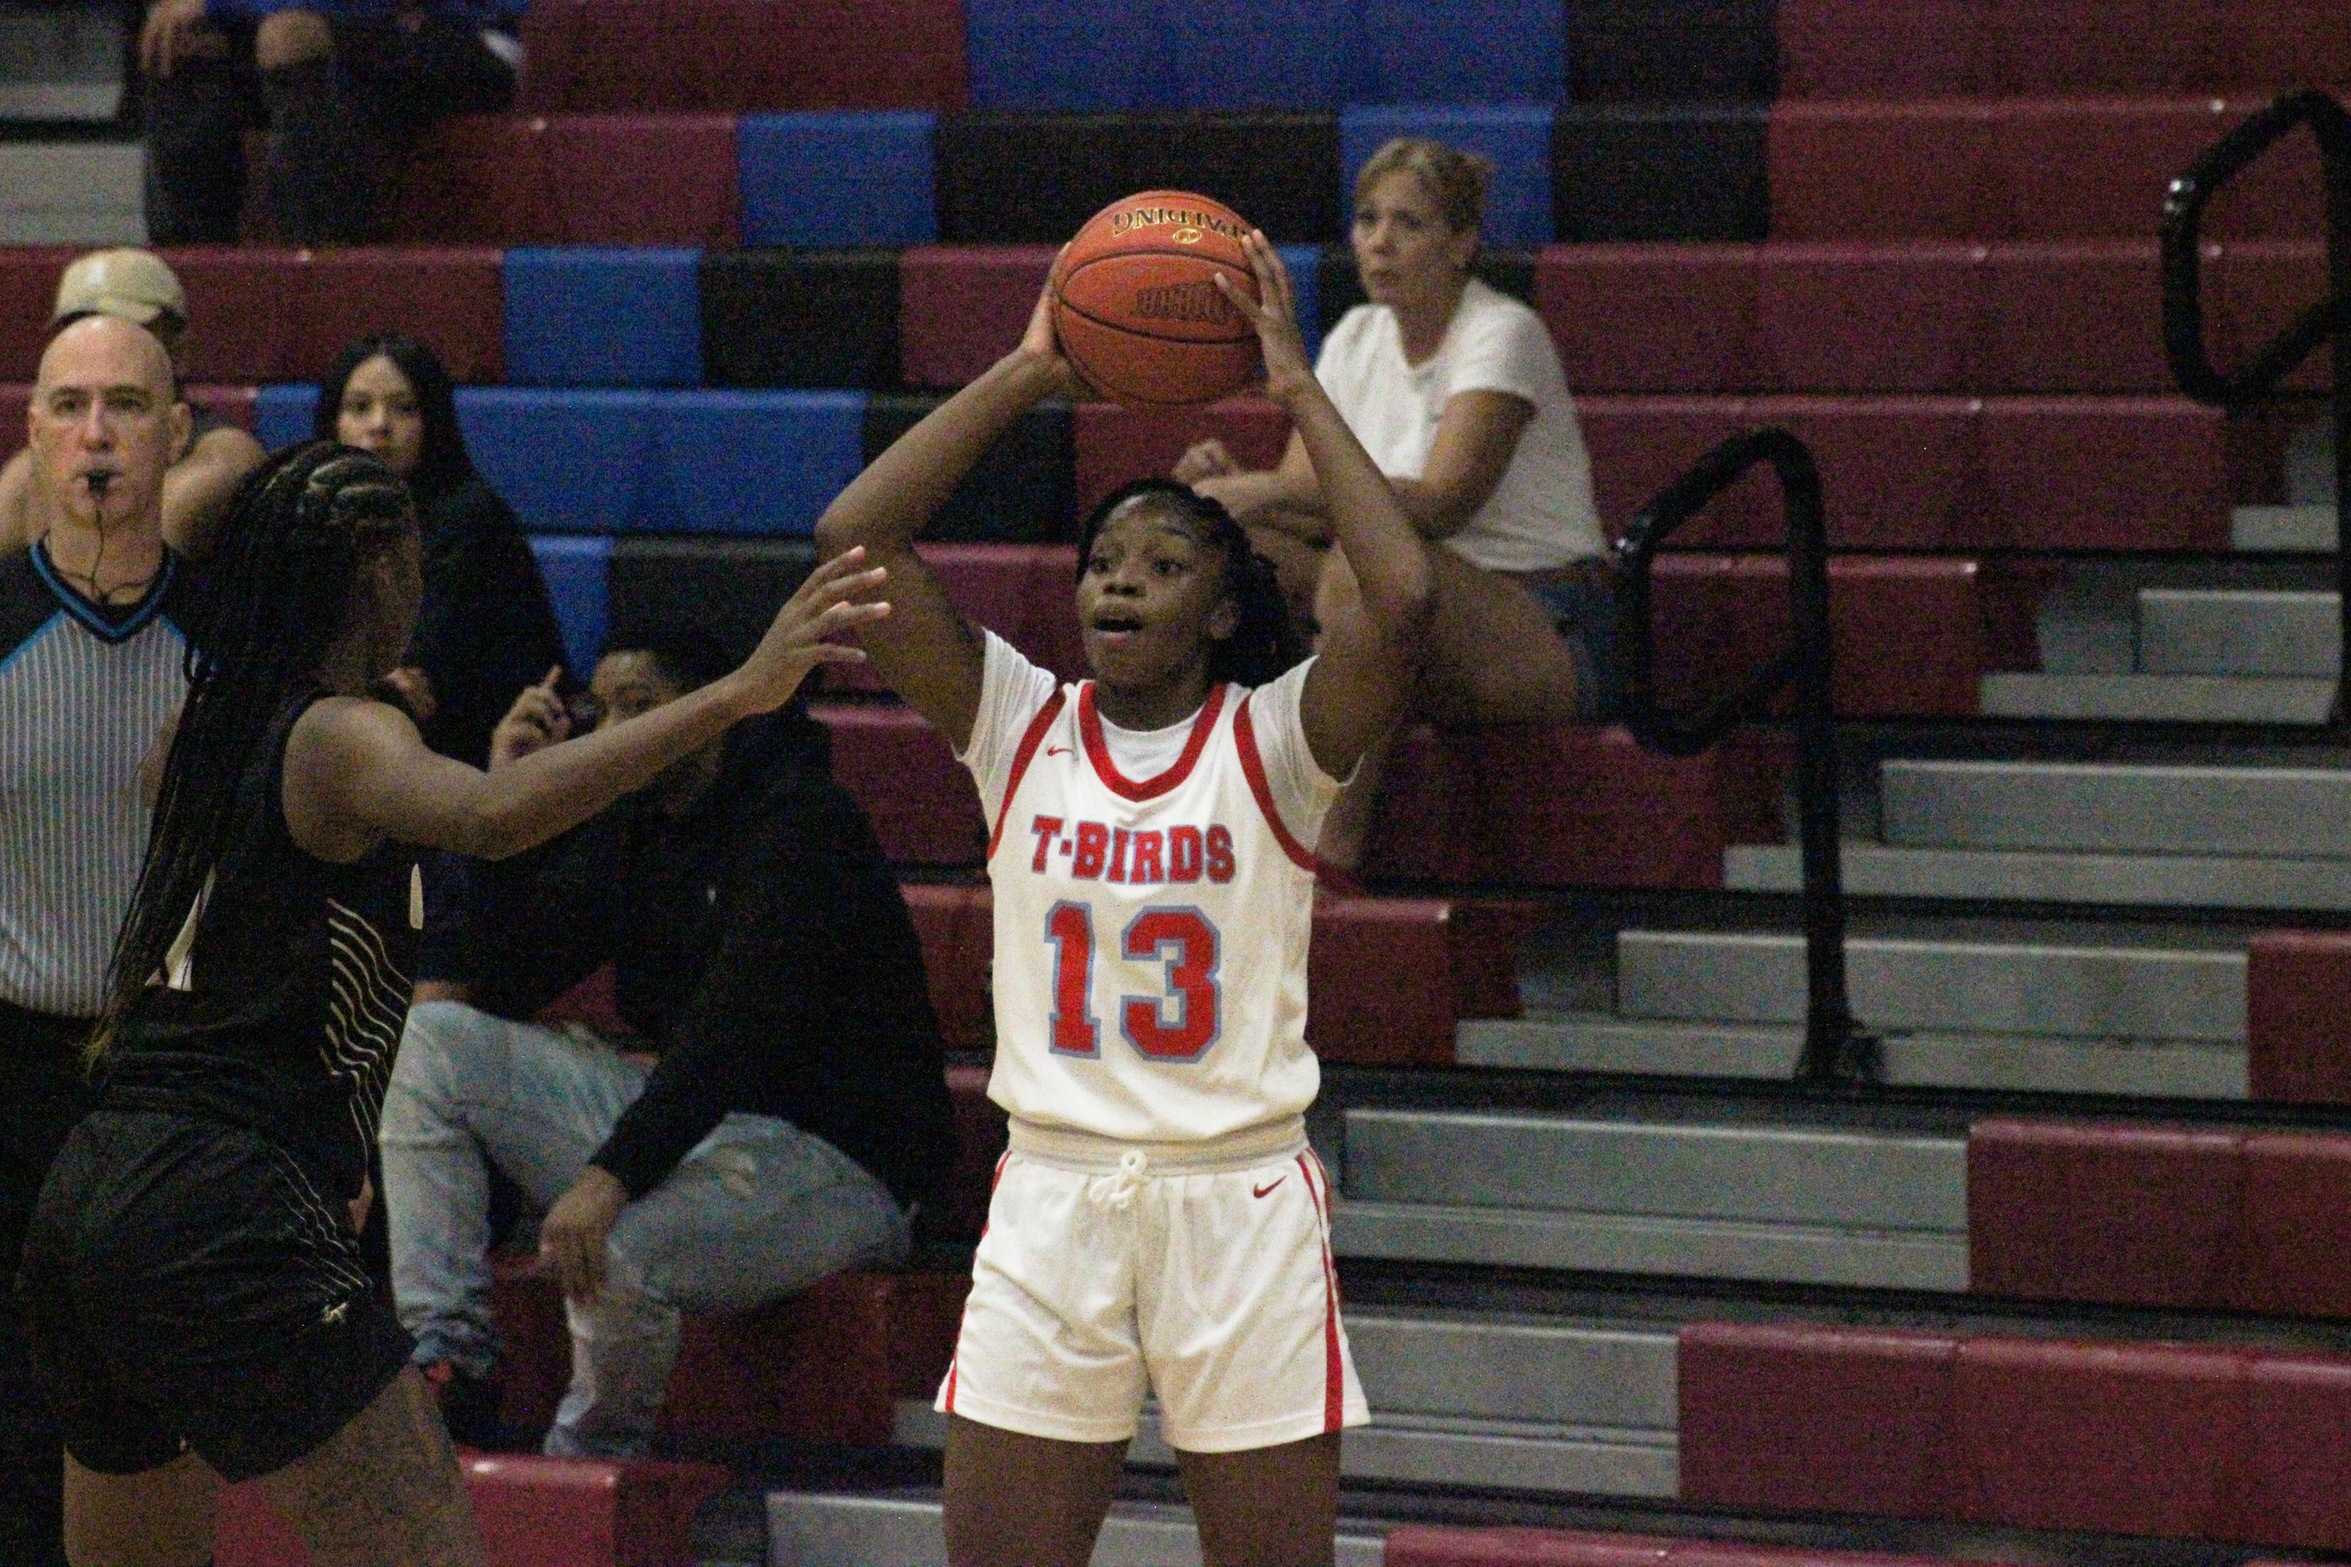 Women's Basketball Has Strong Second Half to Beat CAC, 64-54